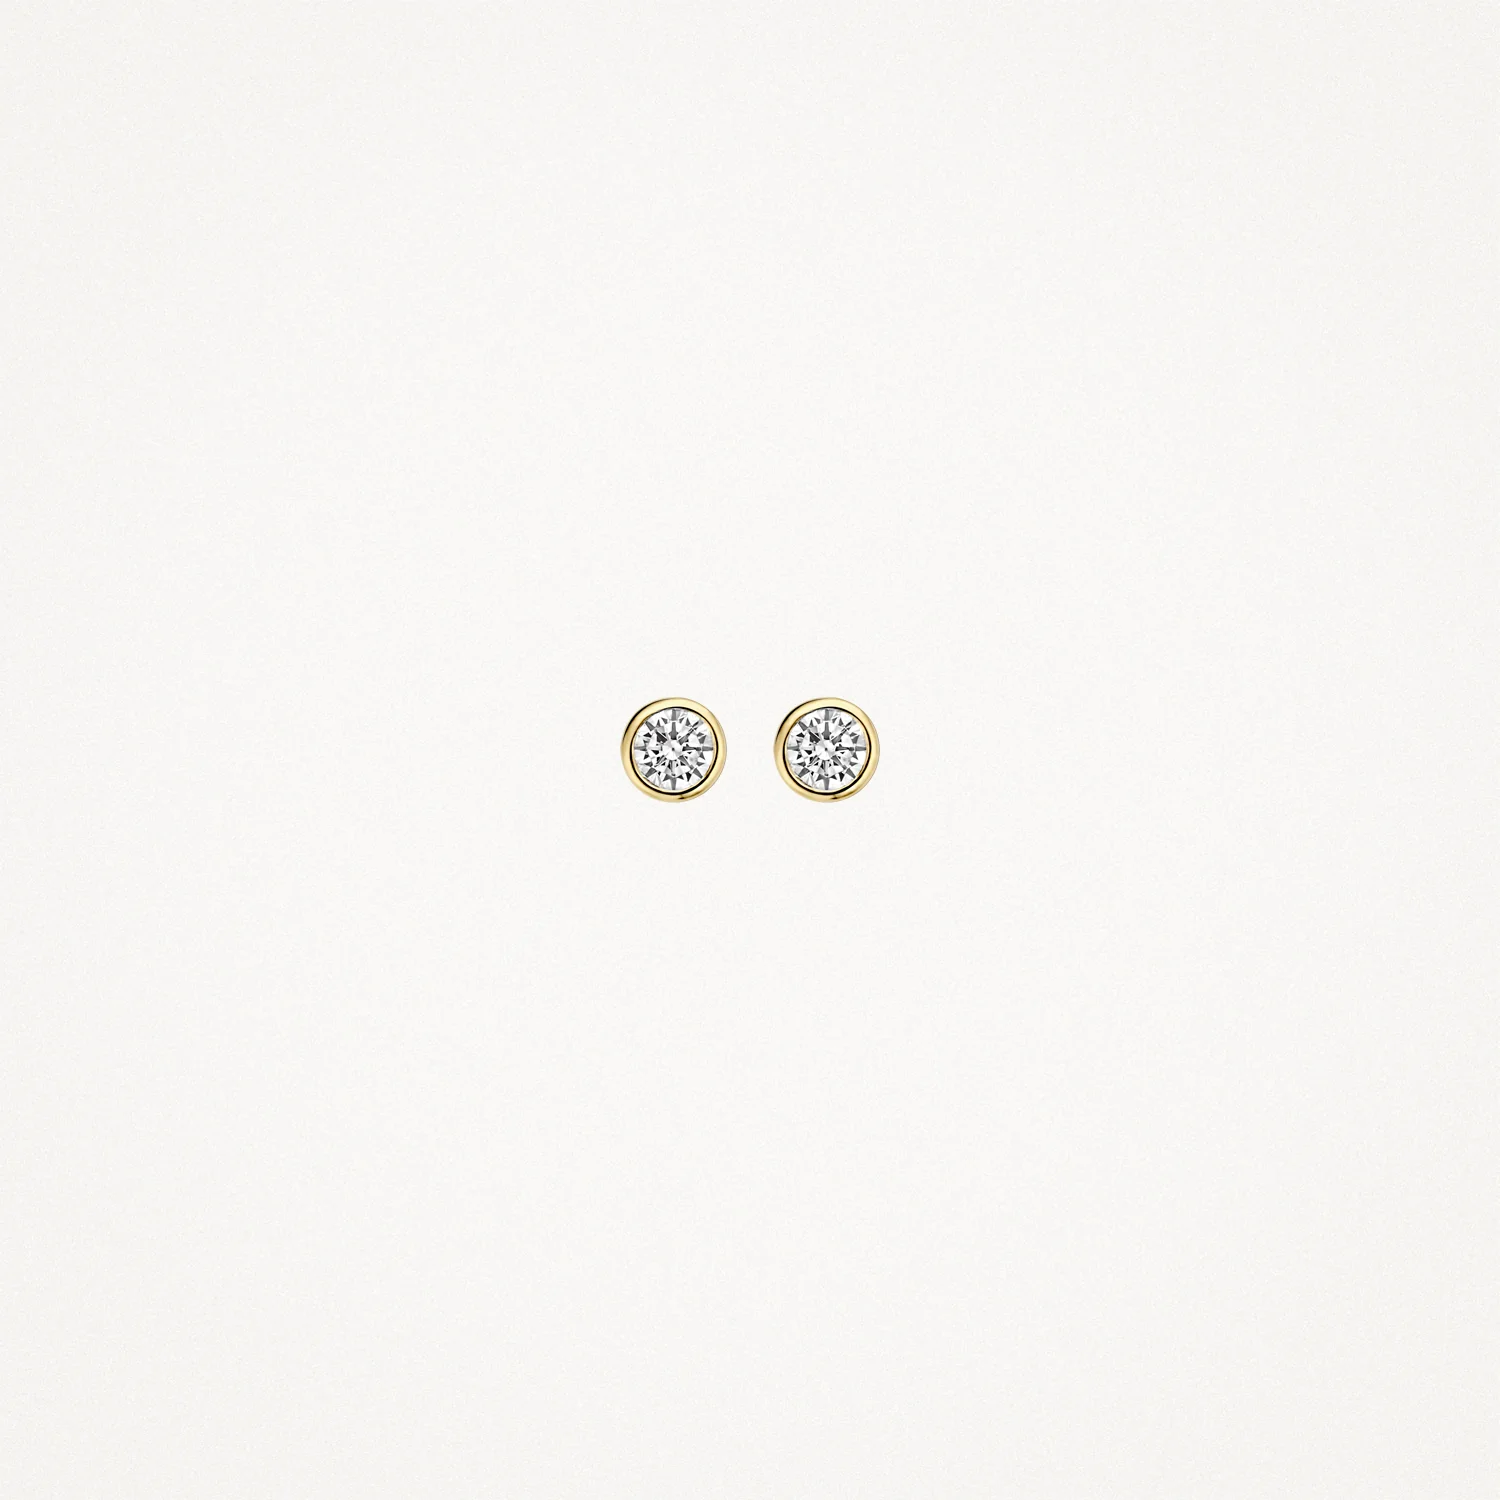 Blush Gold & CZ Stud Earrings - Extra Small